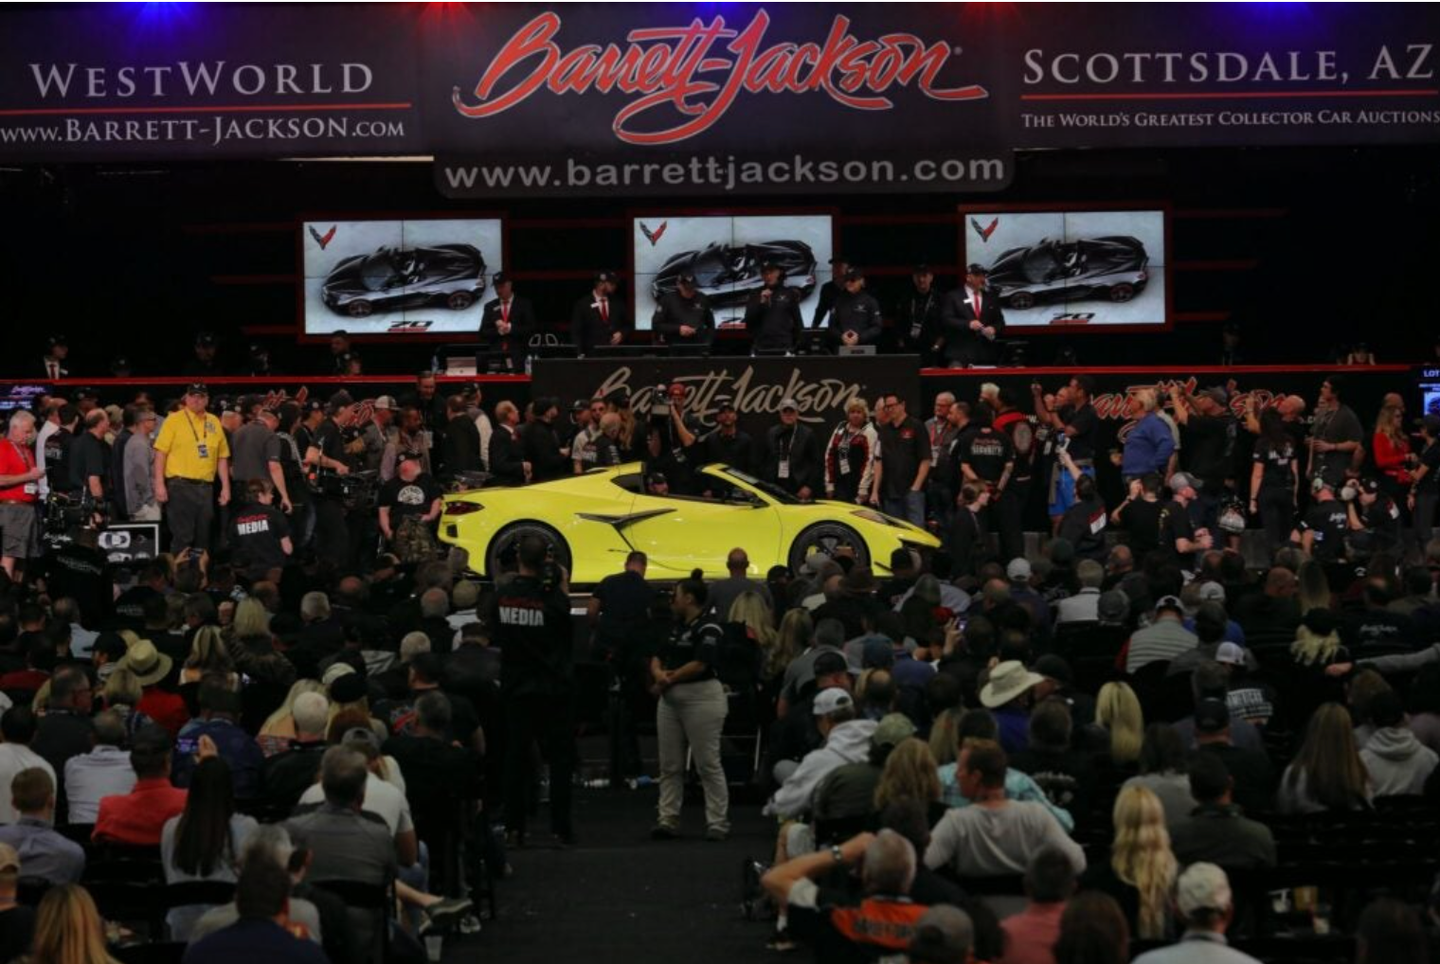 The bidding for the Corvette garnered much excitement from the crowd (Barrett-Jackson)